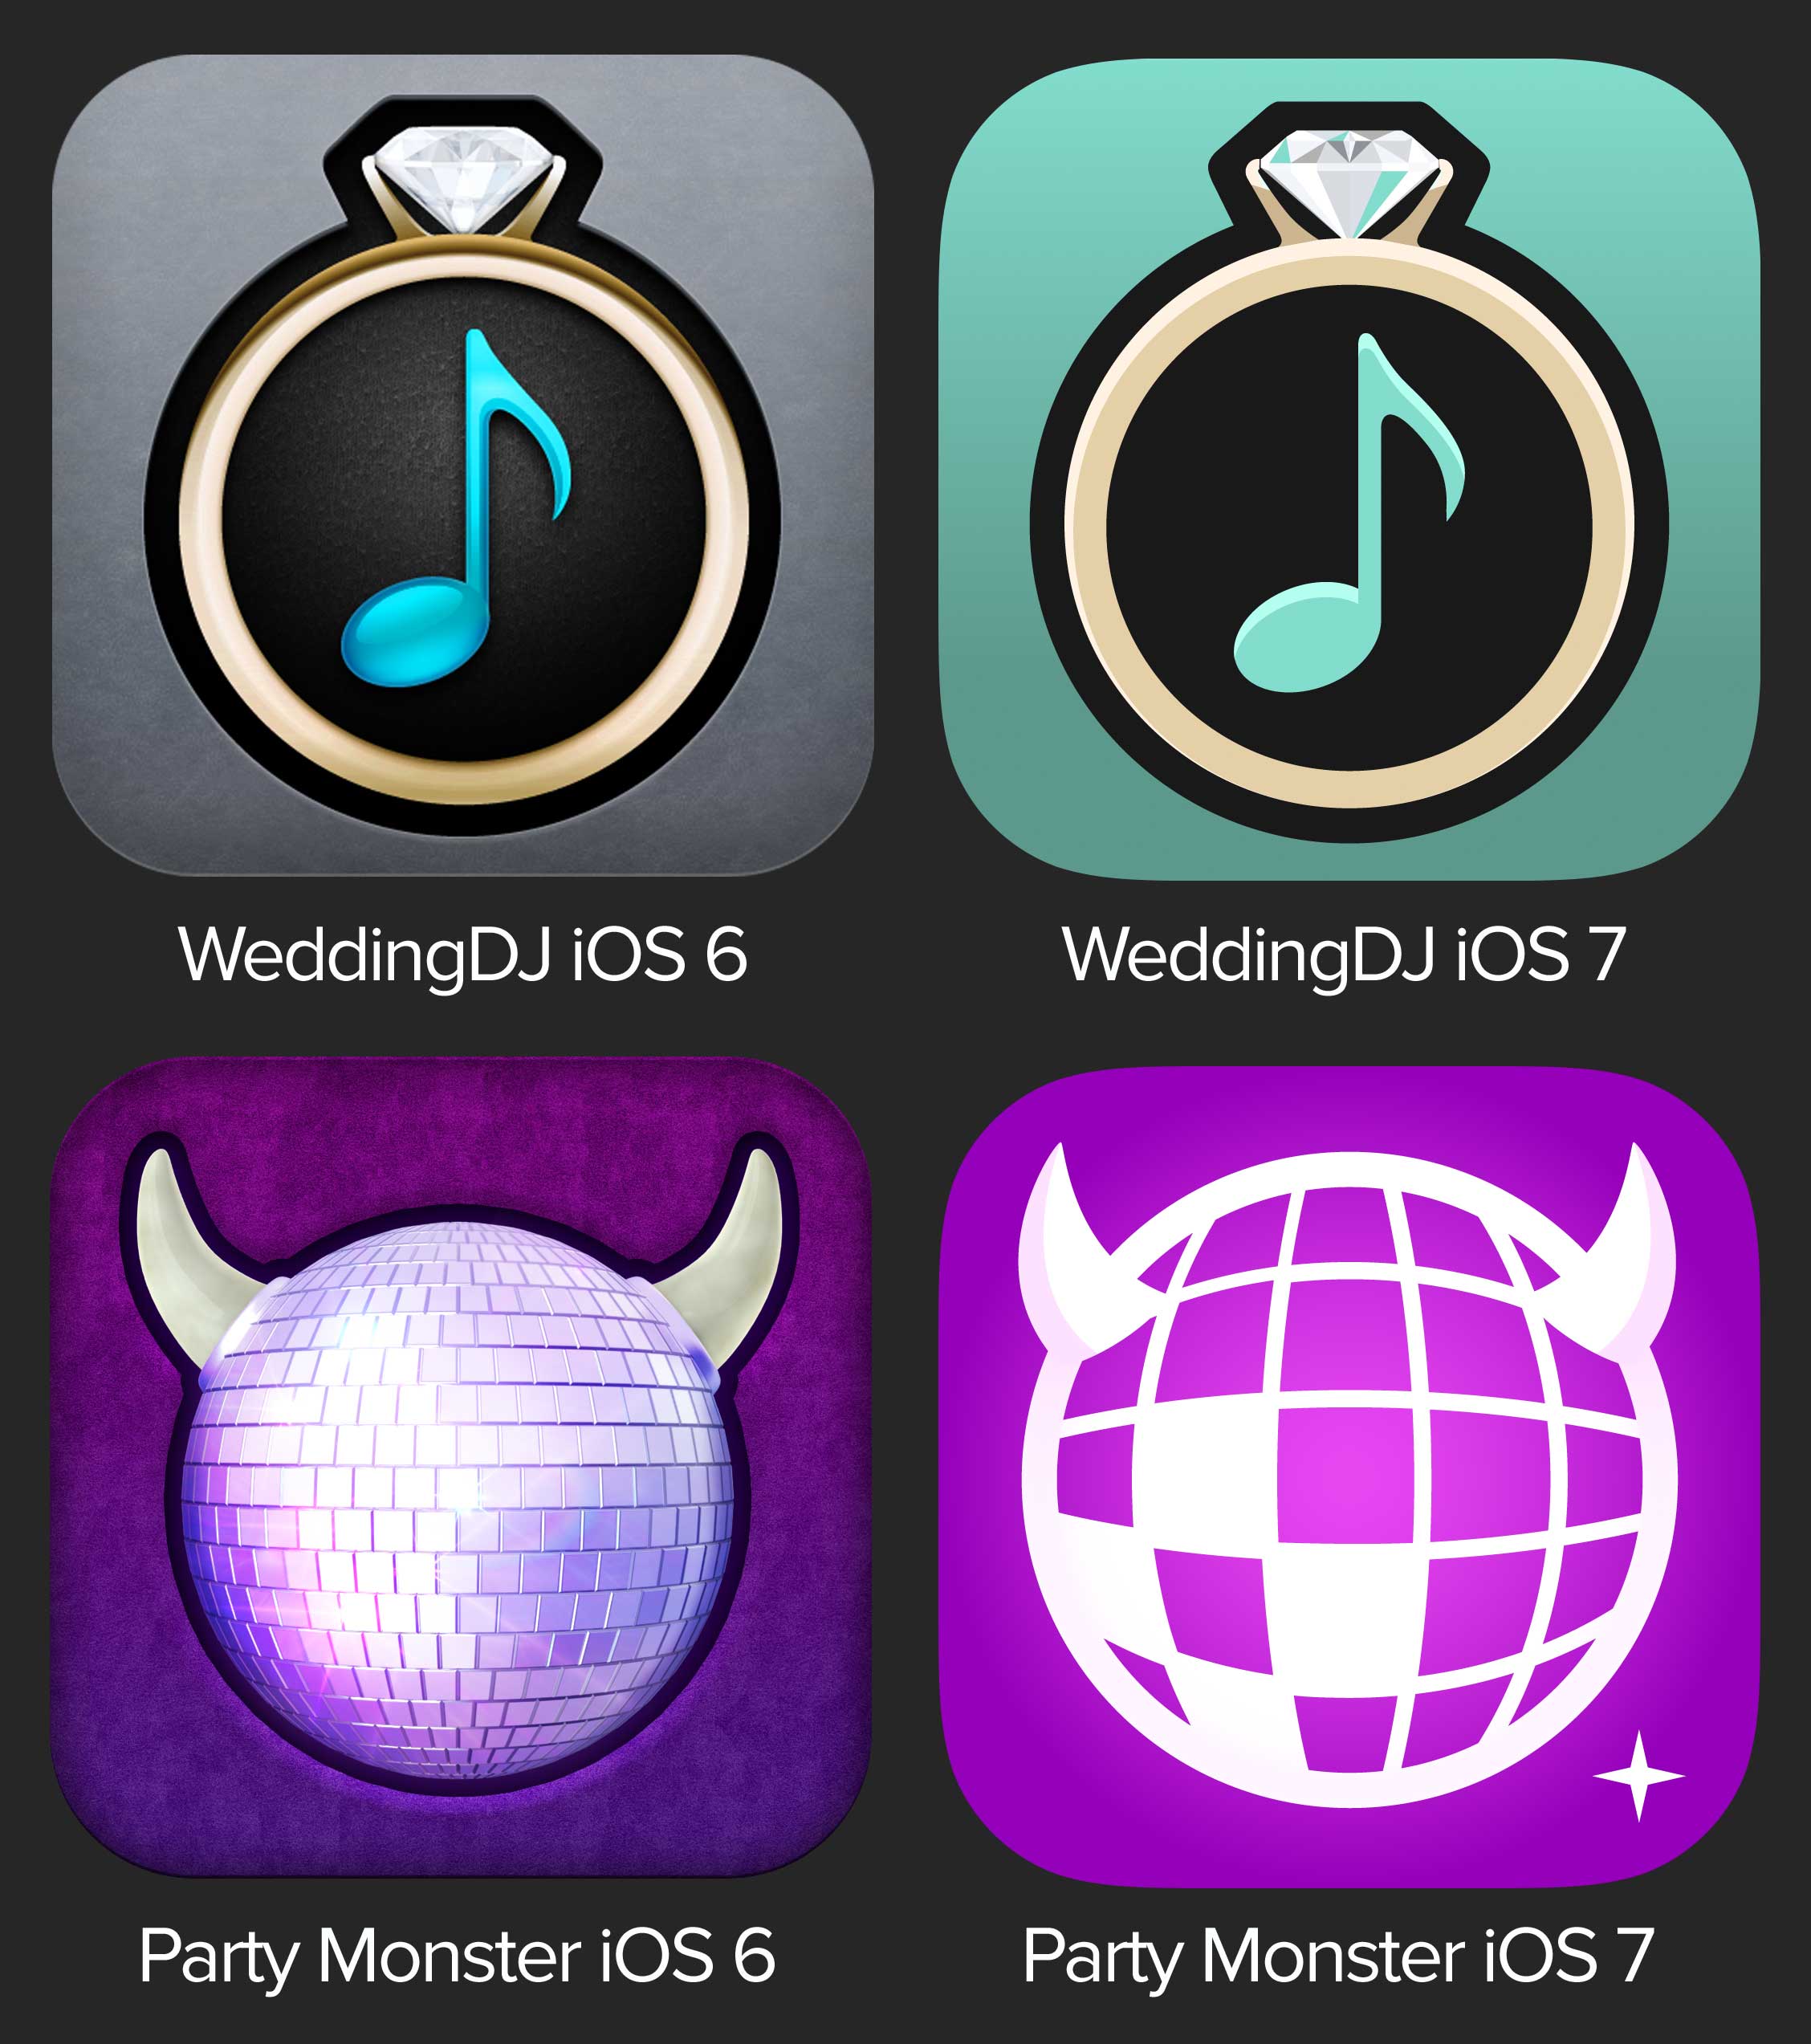 Side-by-side comparison of the old design versus the new cleaner design for WeddingDJ's and Party Monster's iOS app icons